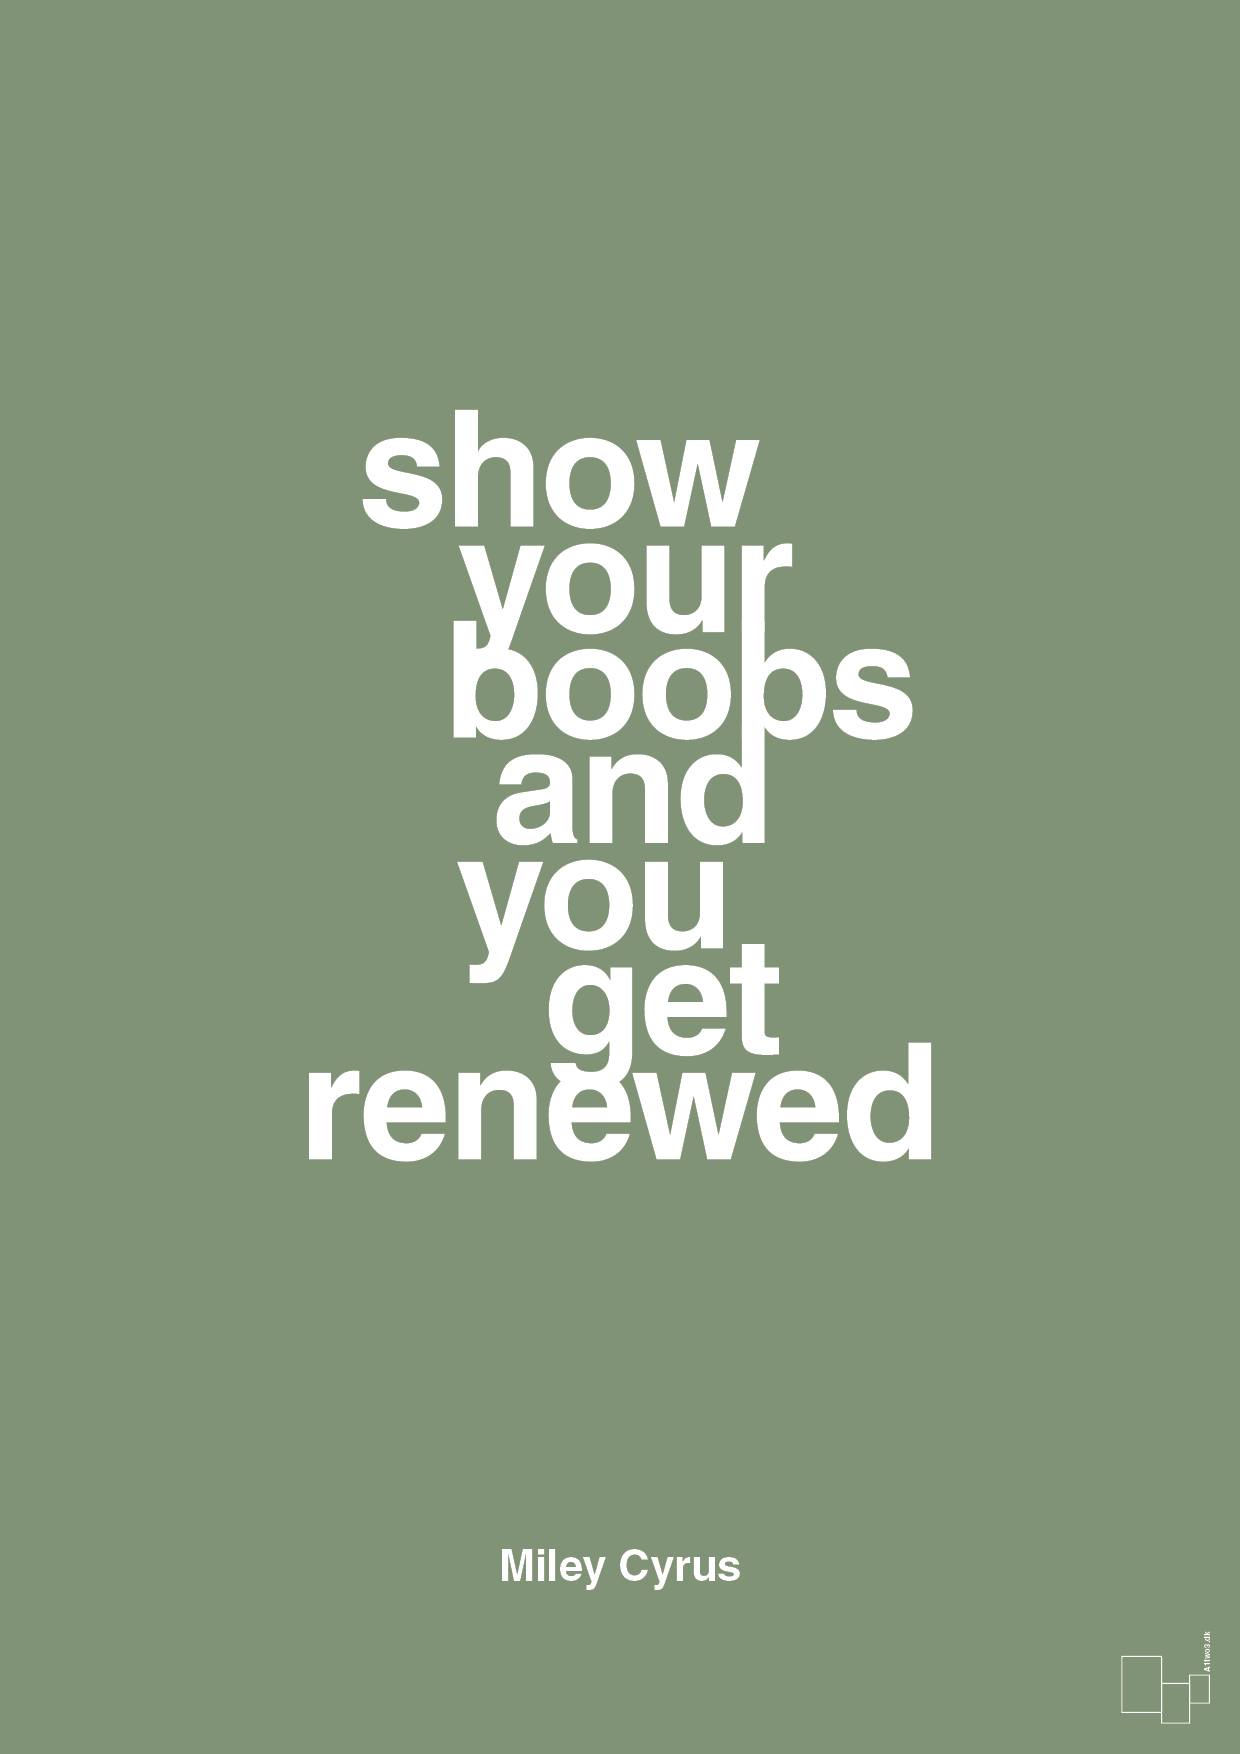 show your boobs and you get renewed - Plakat med Citater i Jade